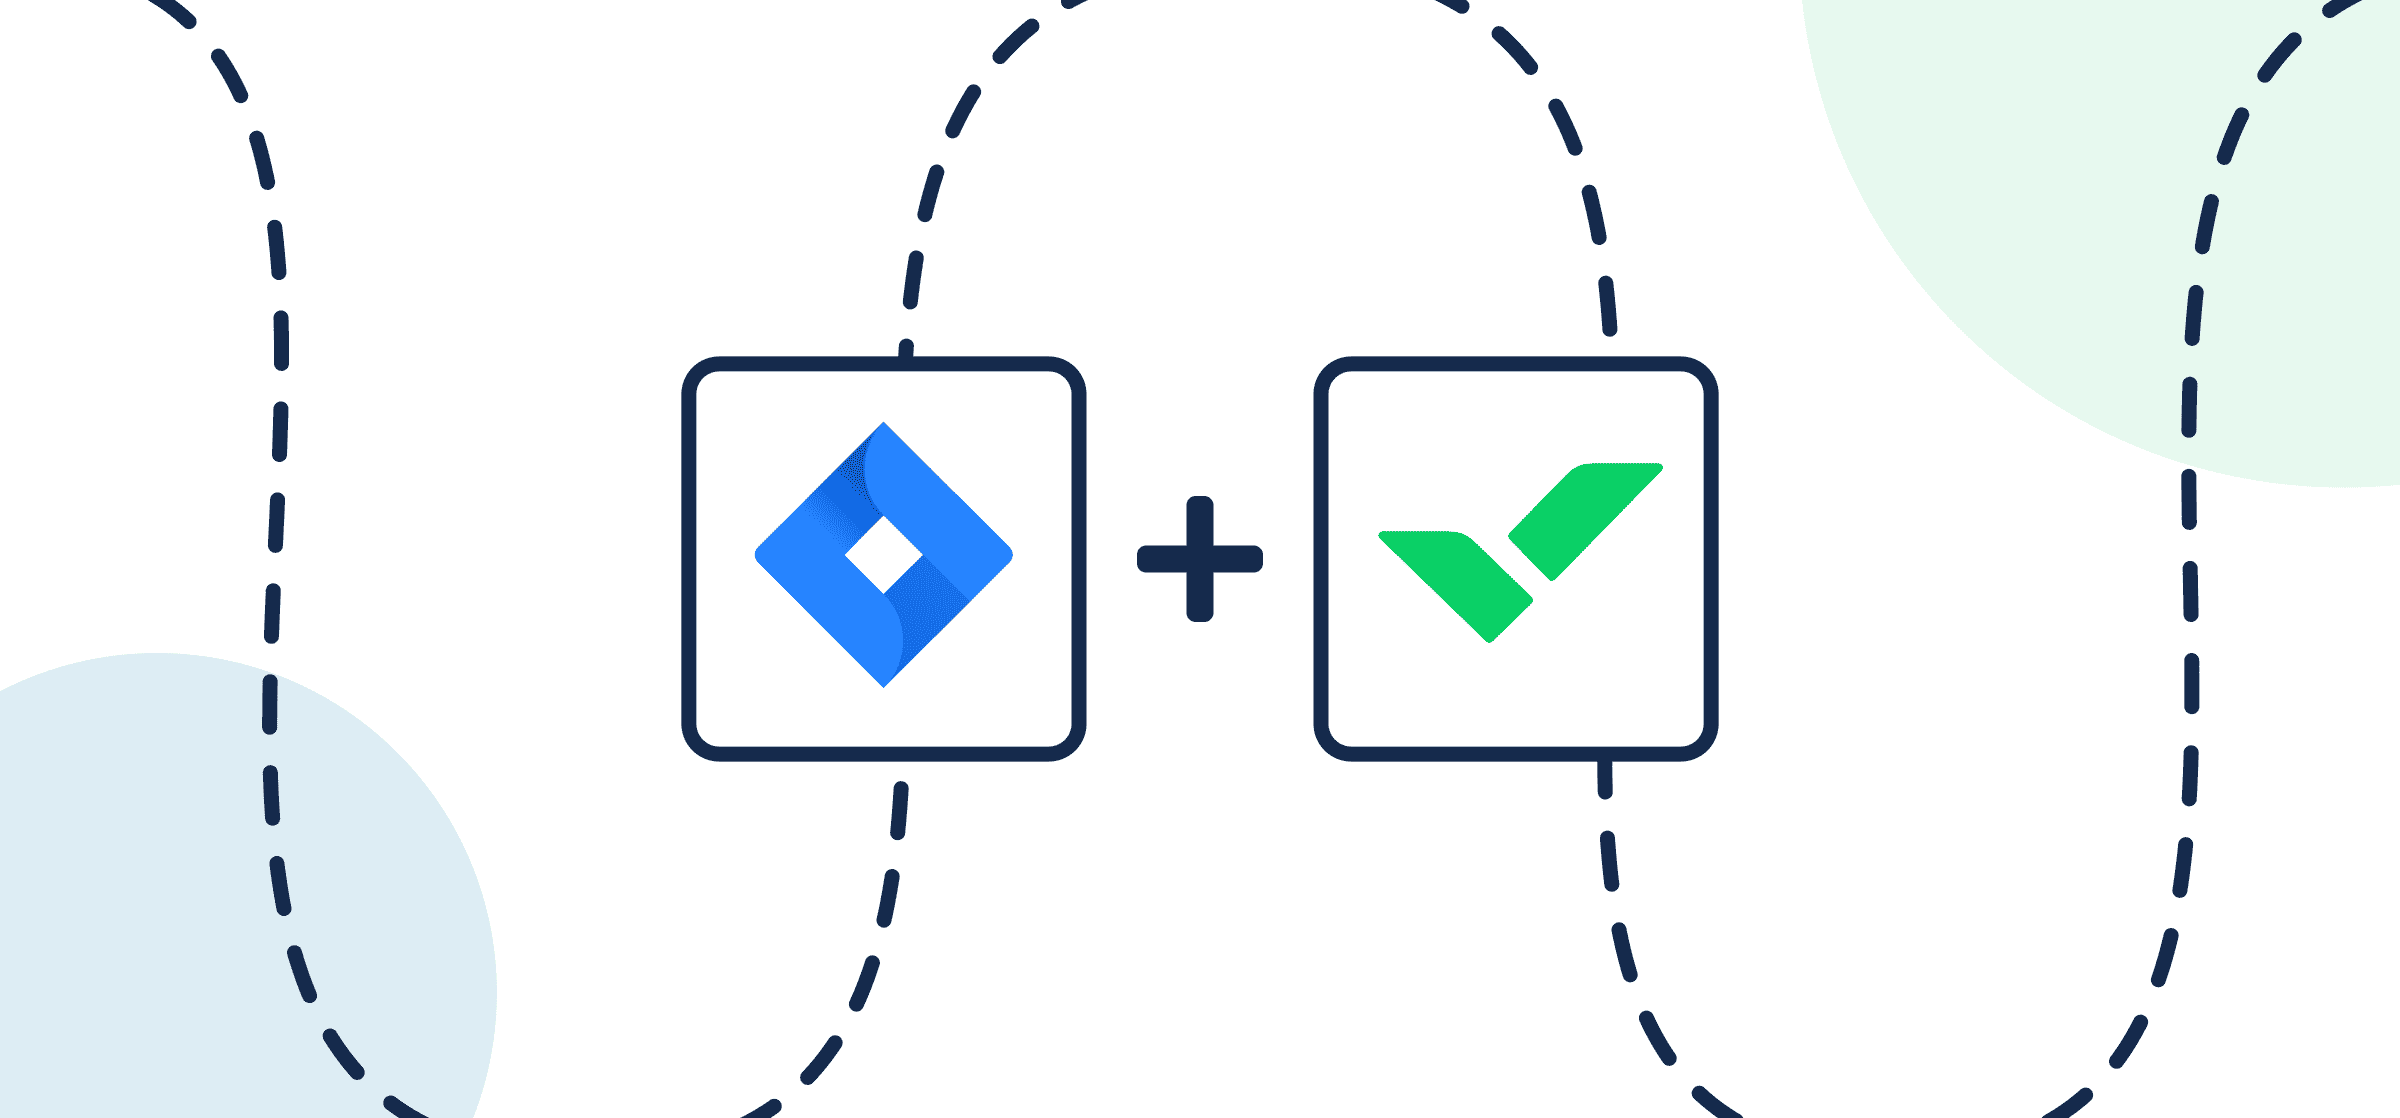 Featured image displaying the logos of Jira and Wrike in Unito's guide to setting up a simple Two-Way Sync